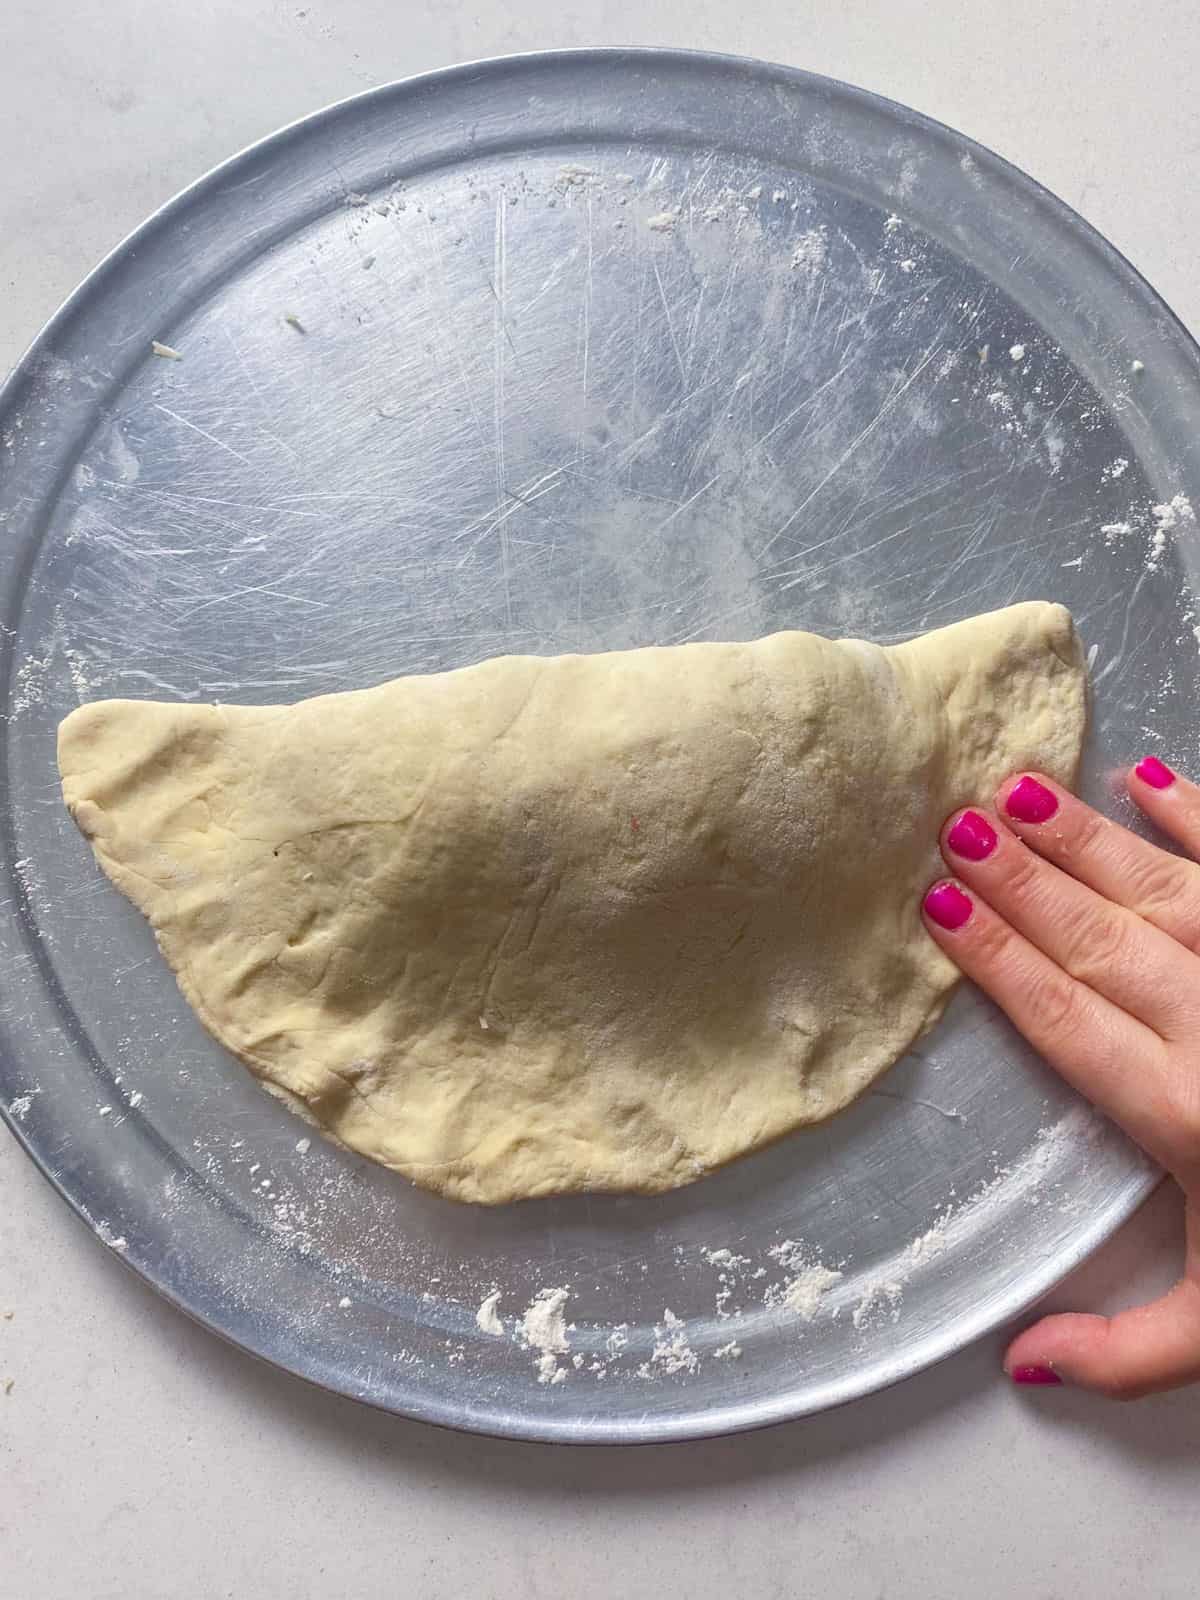 Fold the calzone and crimp the pizza dough around the edges so the cheese is sealed inside.